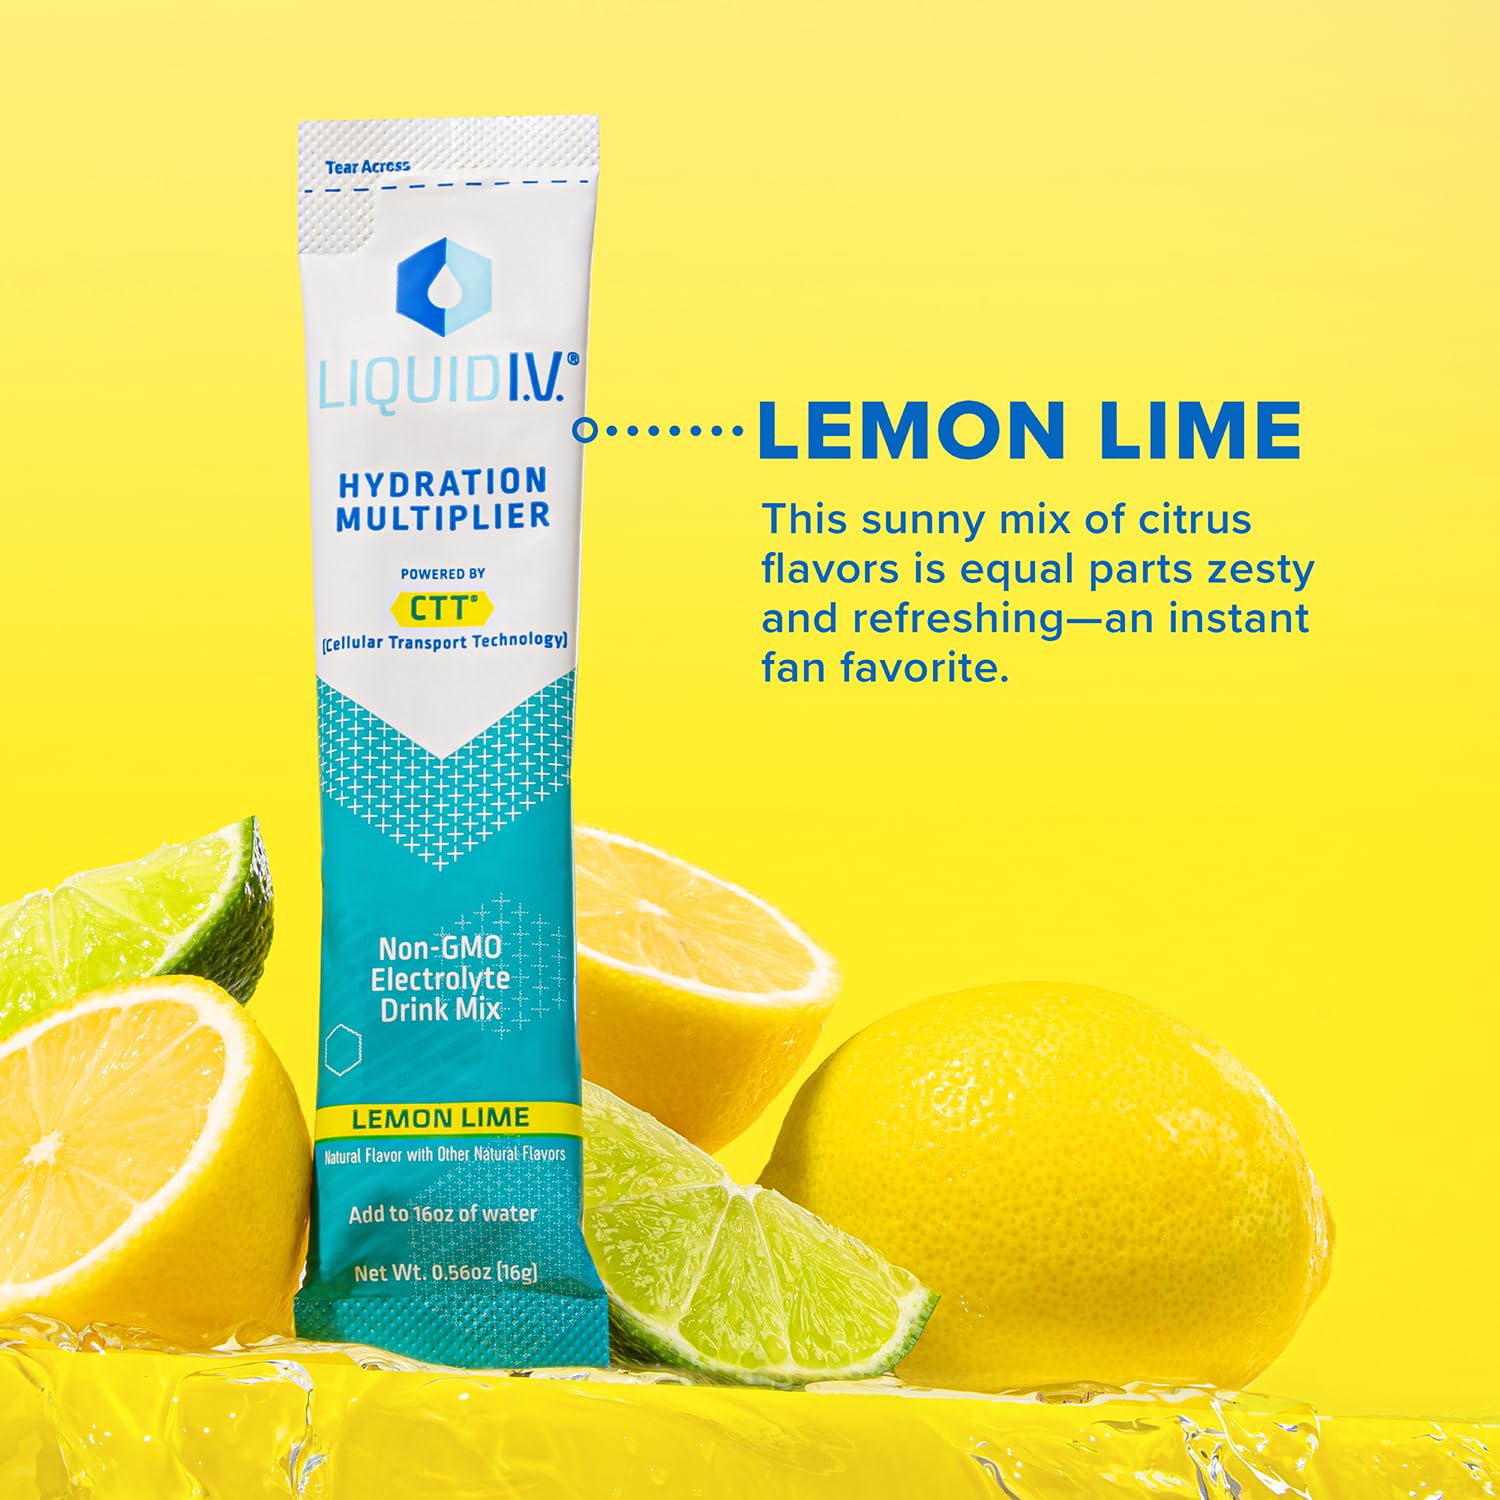 Buy Liquid I.V. Hydration Multiplier Variety Pack– Lemon Lime, Passion Fruit, Strawberry, Tropical Punch - Hydration Powder Packets, Electrolyte Powder Drink Mix, Single-Serve Sticks, 1 Pack (16 Servings) on Amazon.com ? FREE SHIPPING on qualified orders